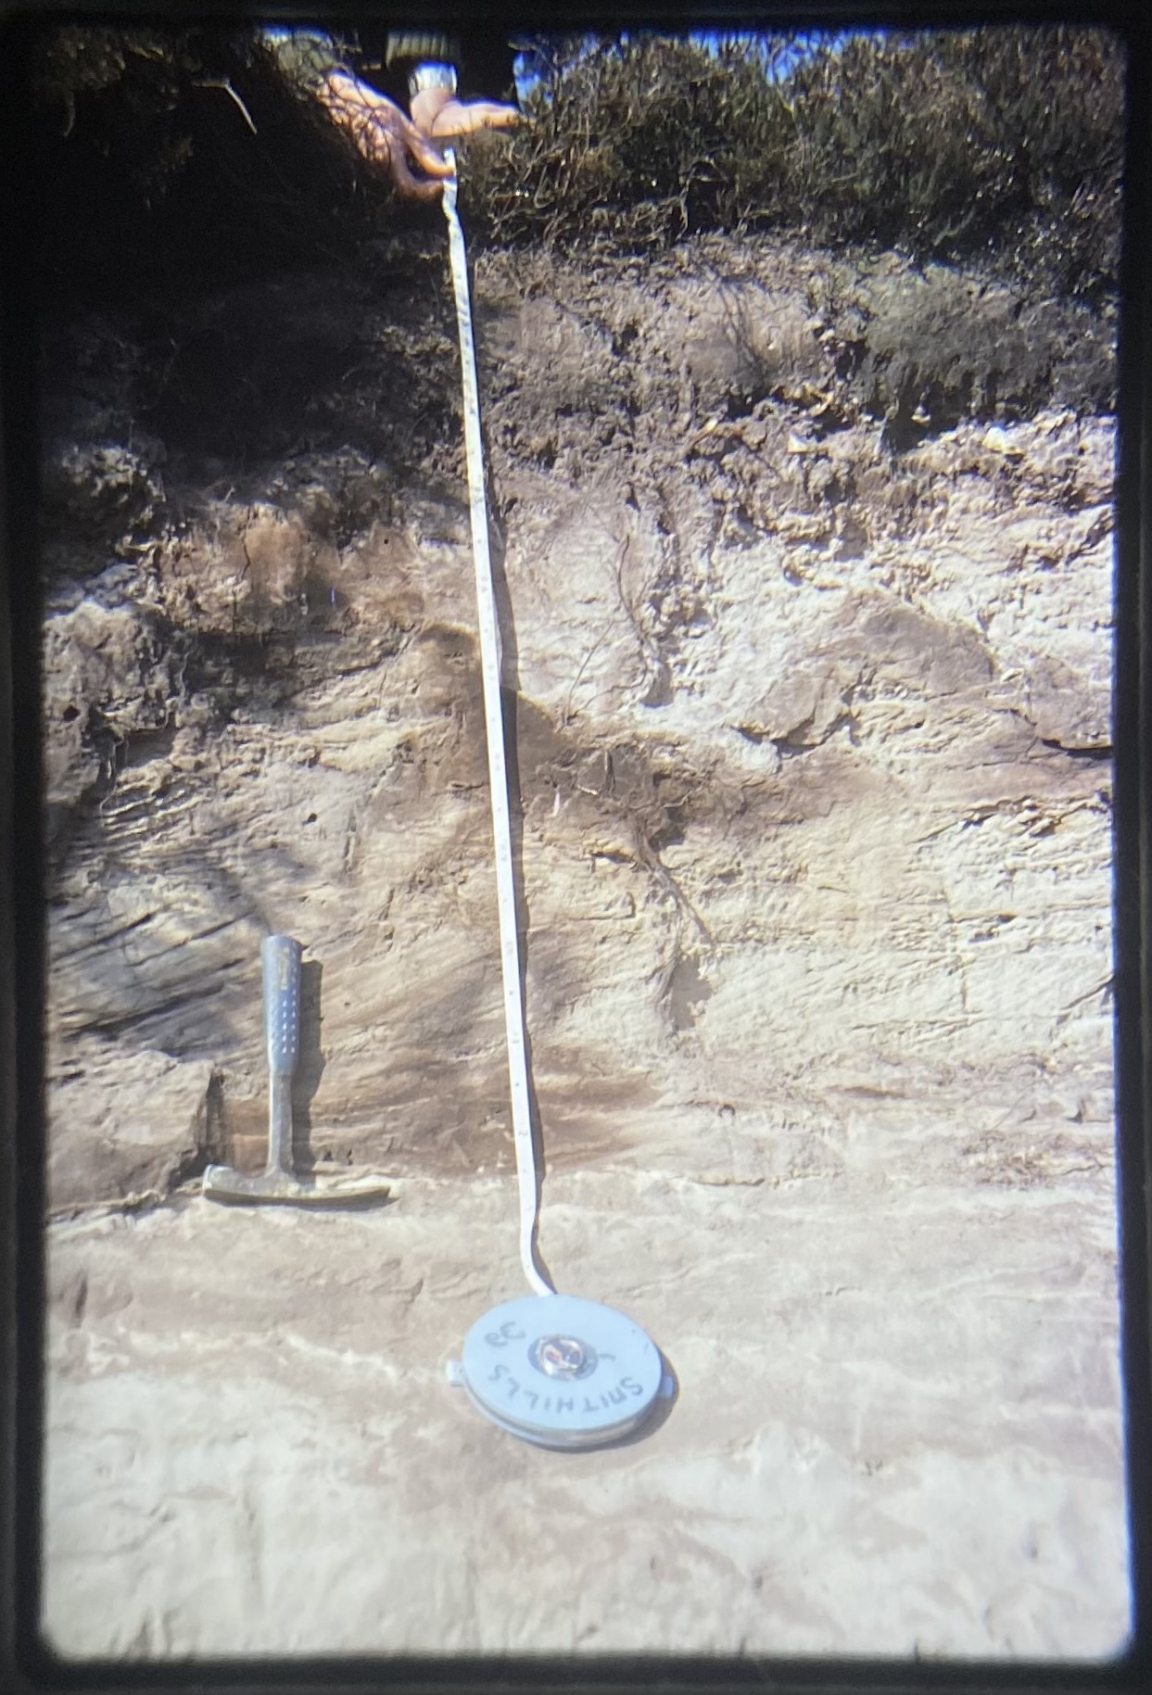 The Tape Measure (1963): An image from 1963 from Georgie’s Grandfather's photo archive: a geology field trip to Dorset, featuring a tape measure and pickaxe, measuring earth layers. Shot on film.